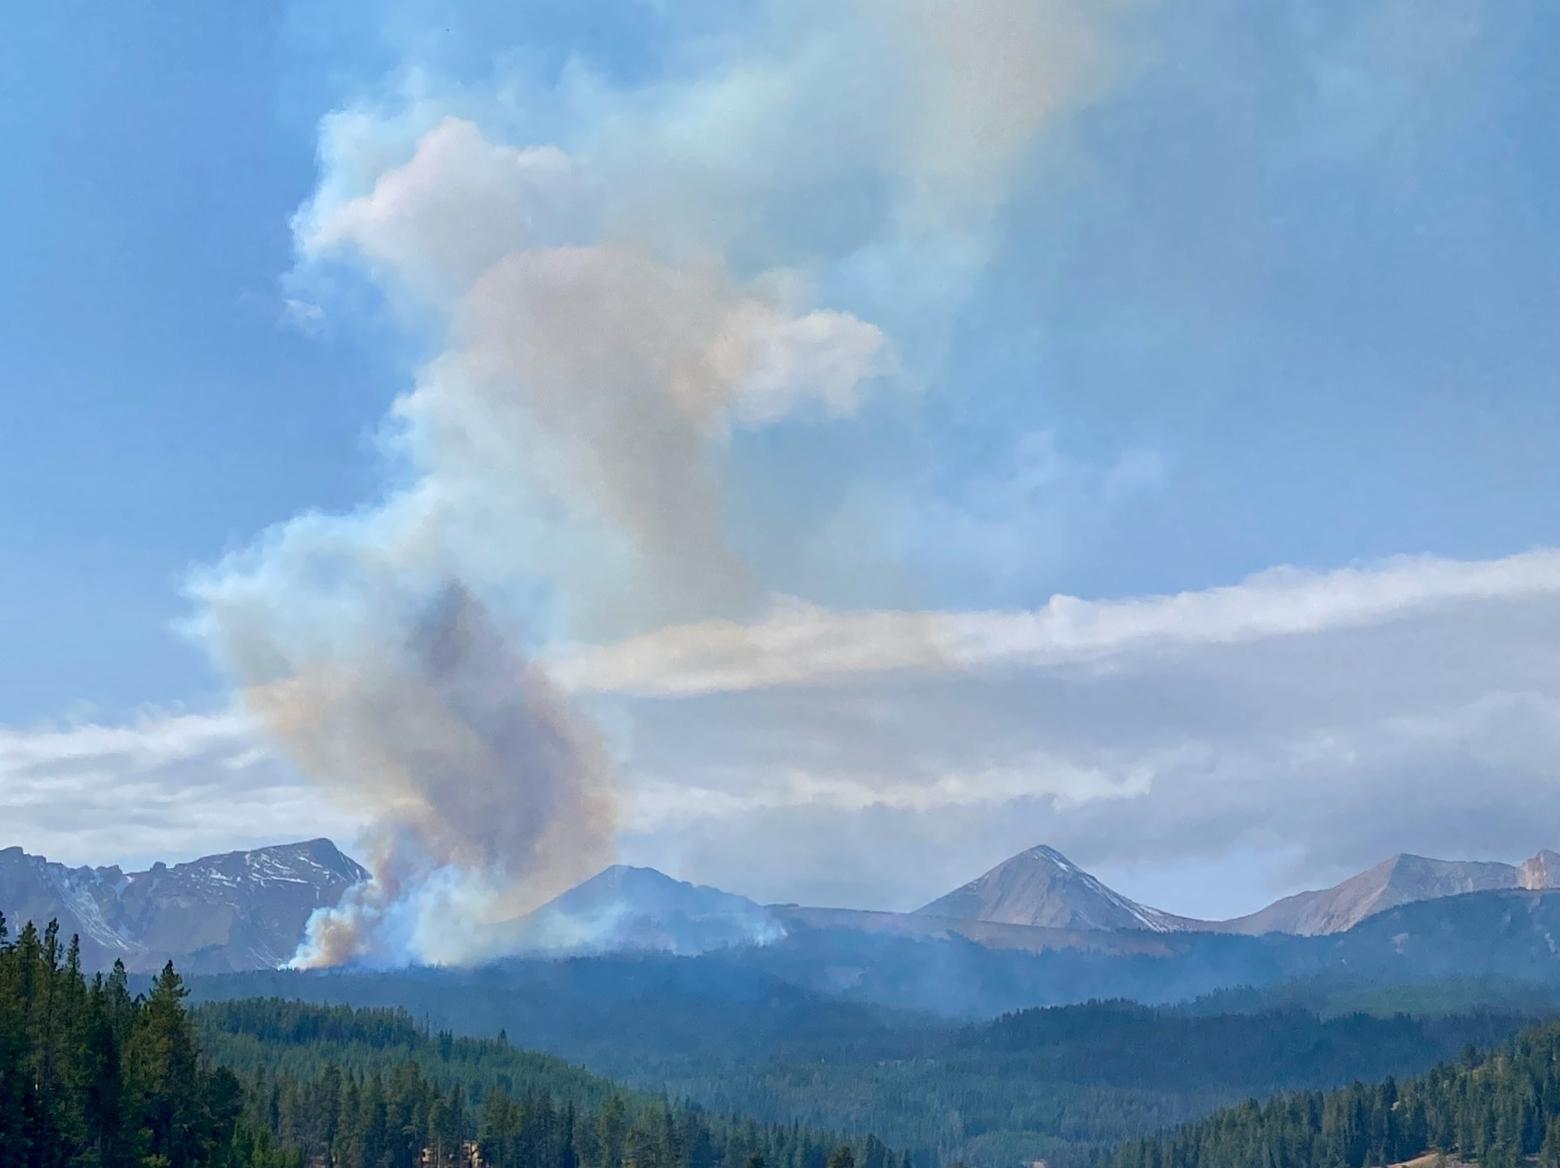 The Shedhorn Fire burned 60 acres in the Taylor Fork drainage 13 miles southwest of Big Sky's Lone Mountain. September 2021. Photo by Joseph T. O'Connor